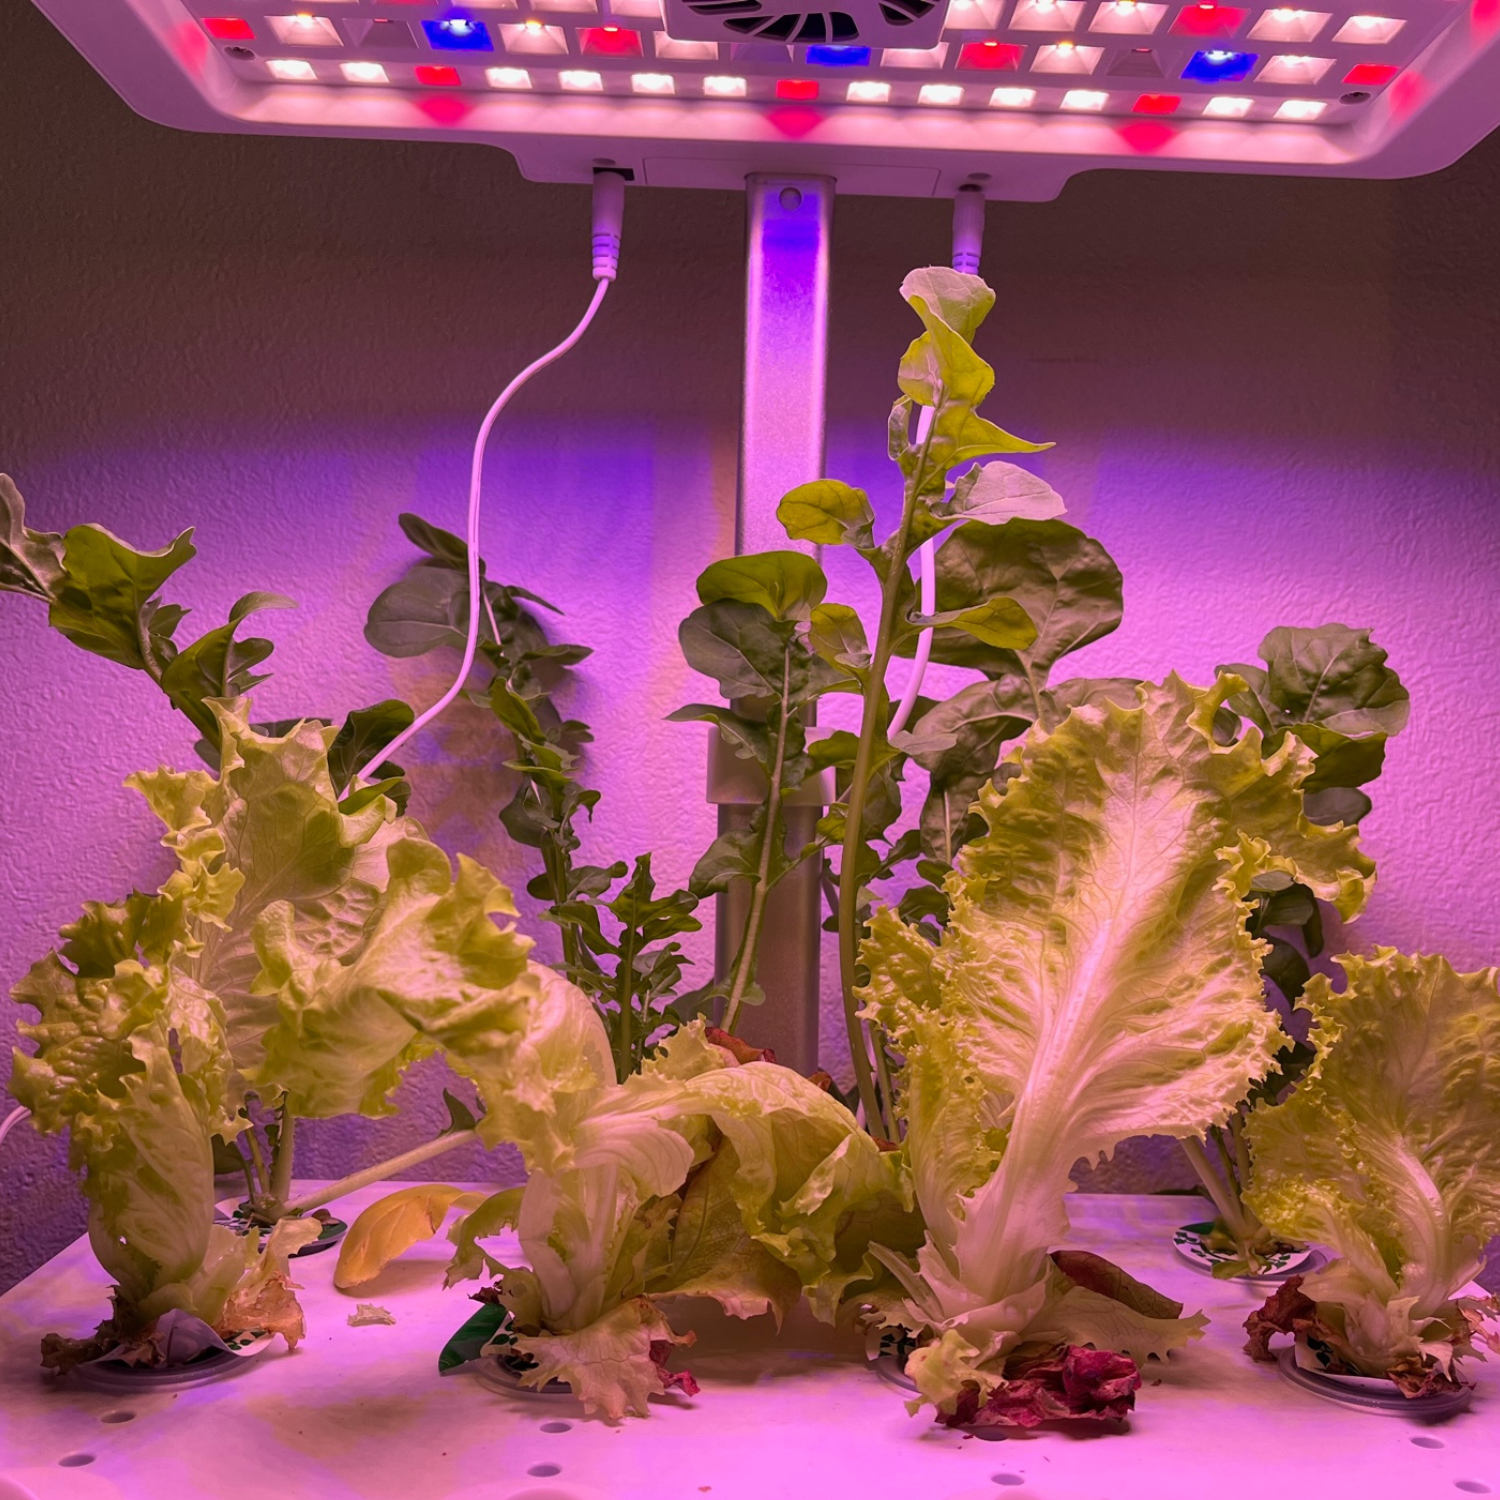 An indoor hydroponic system with rows of green leafy lettuce growing in nutrient-rich water solution under LED grow lights.